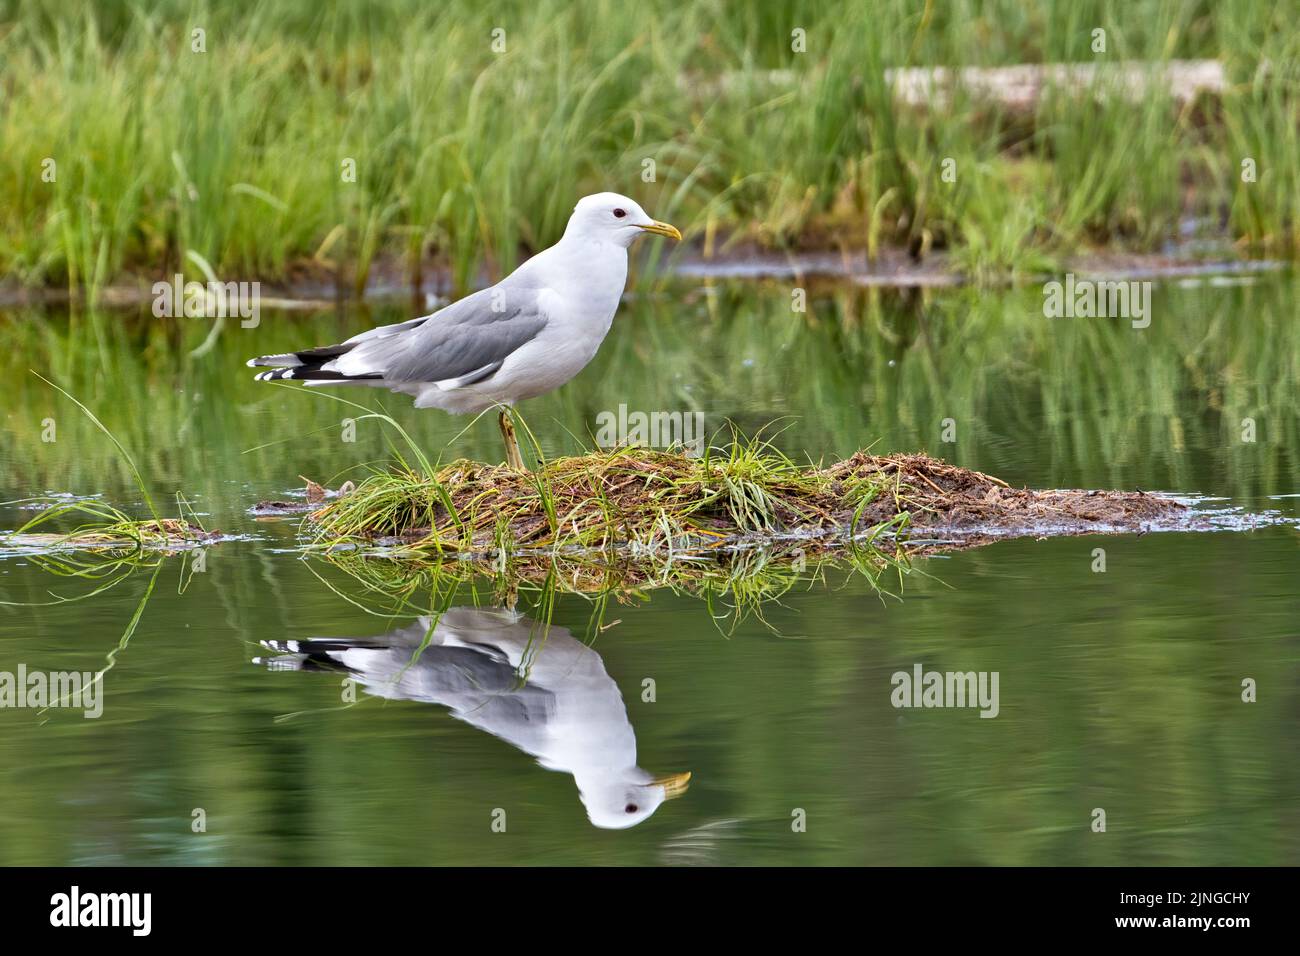 Common gull (Larus canus) on an islet in a lake Stock Photo